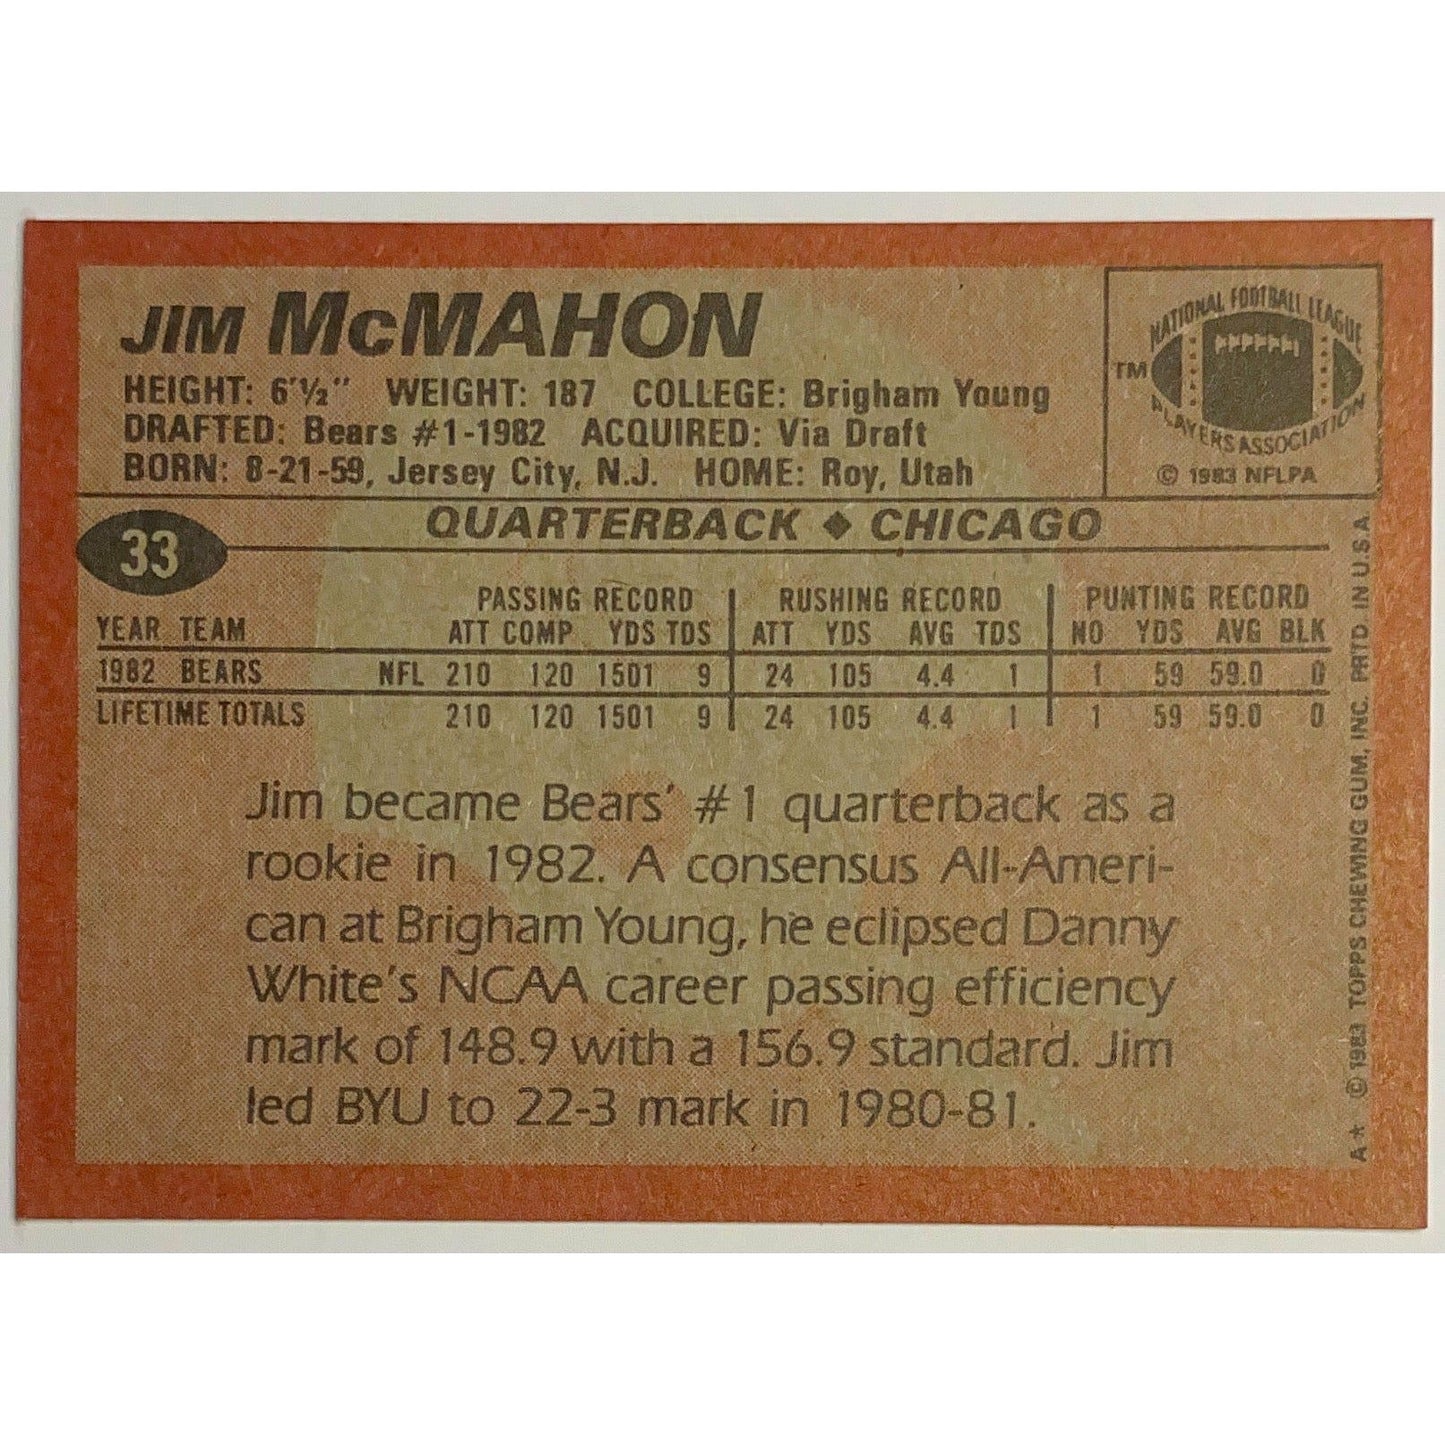  1983 Topps Jim ‘Mad Mac’ McMahon Rookie Card #33  Local Legends Cards & Collectibles